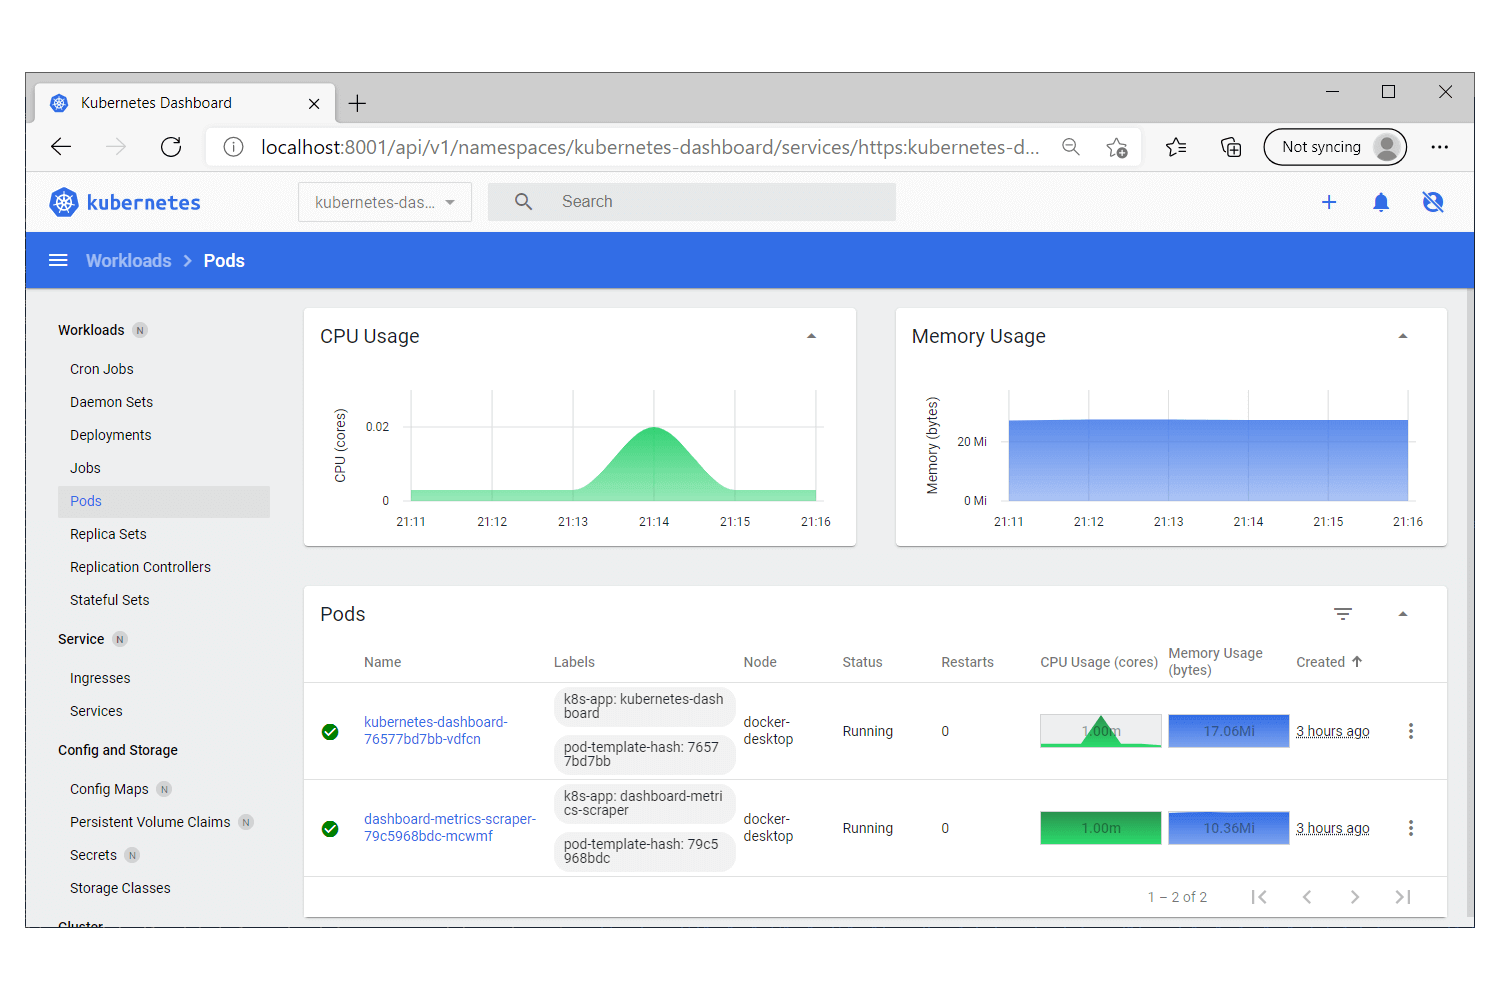 Running Kubernetes and the dashboard with Docker Desktop